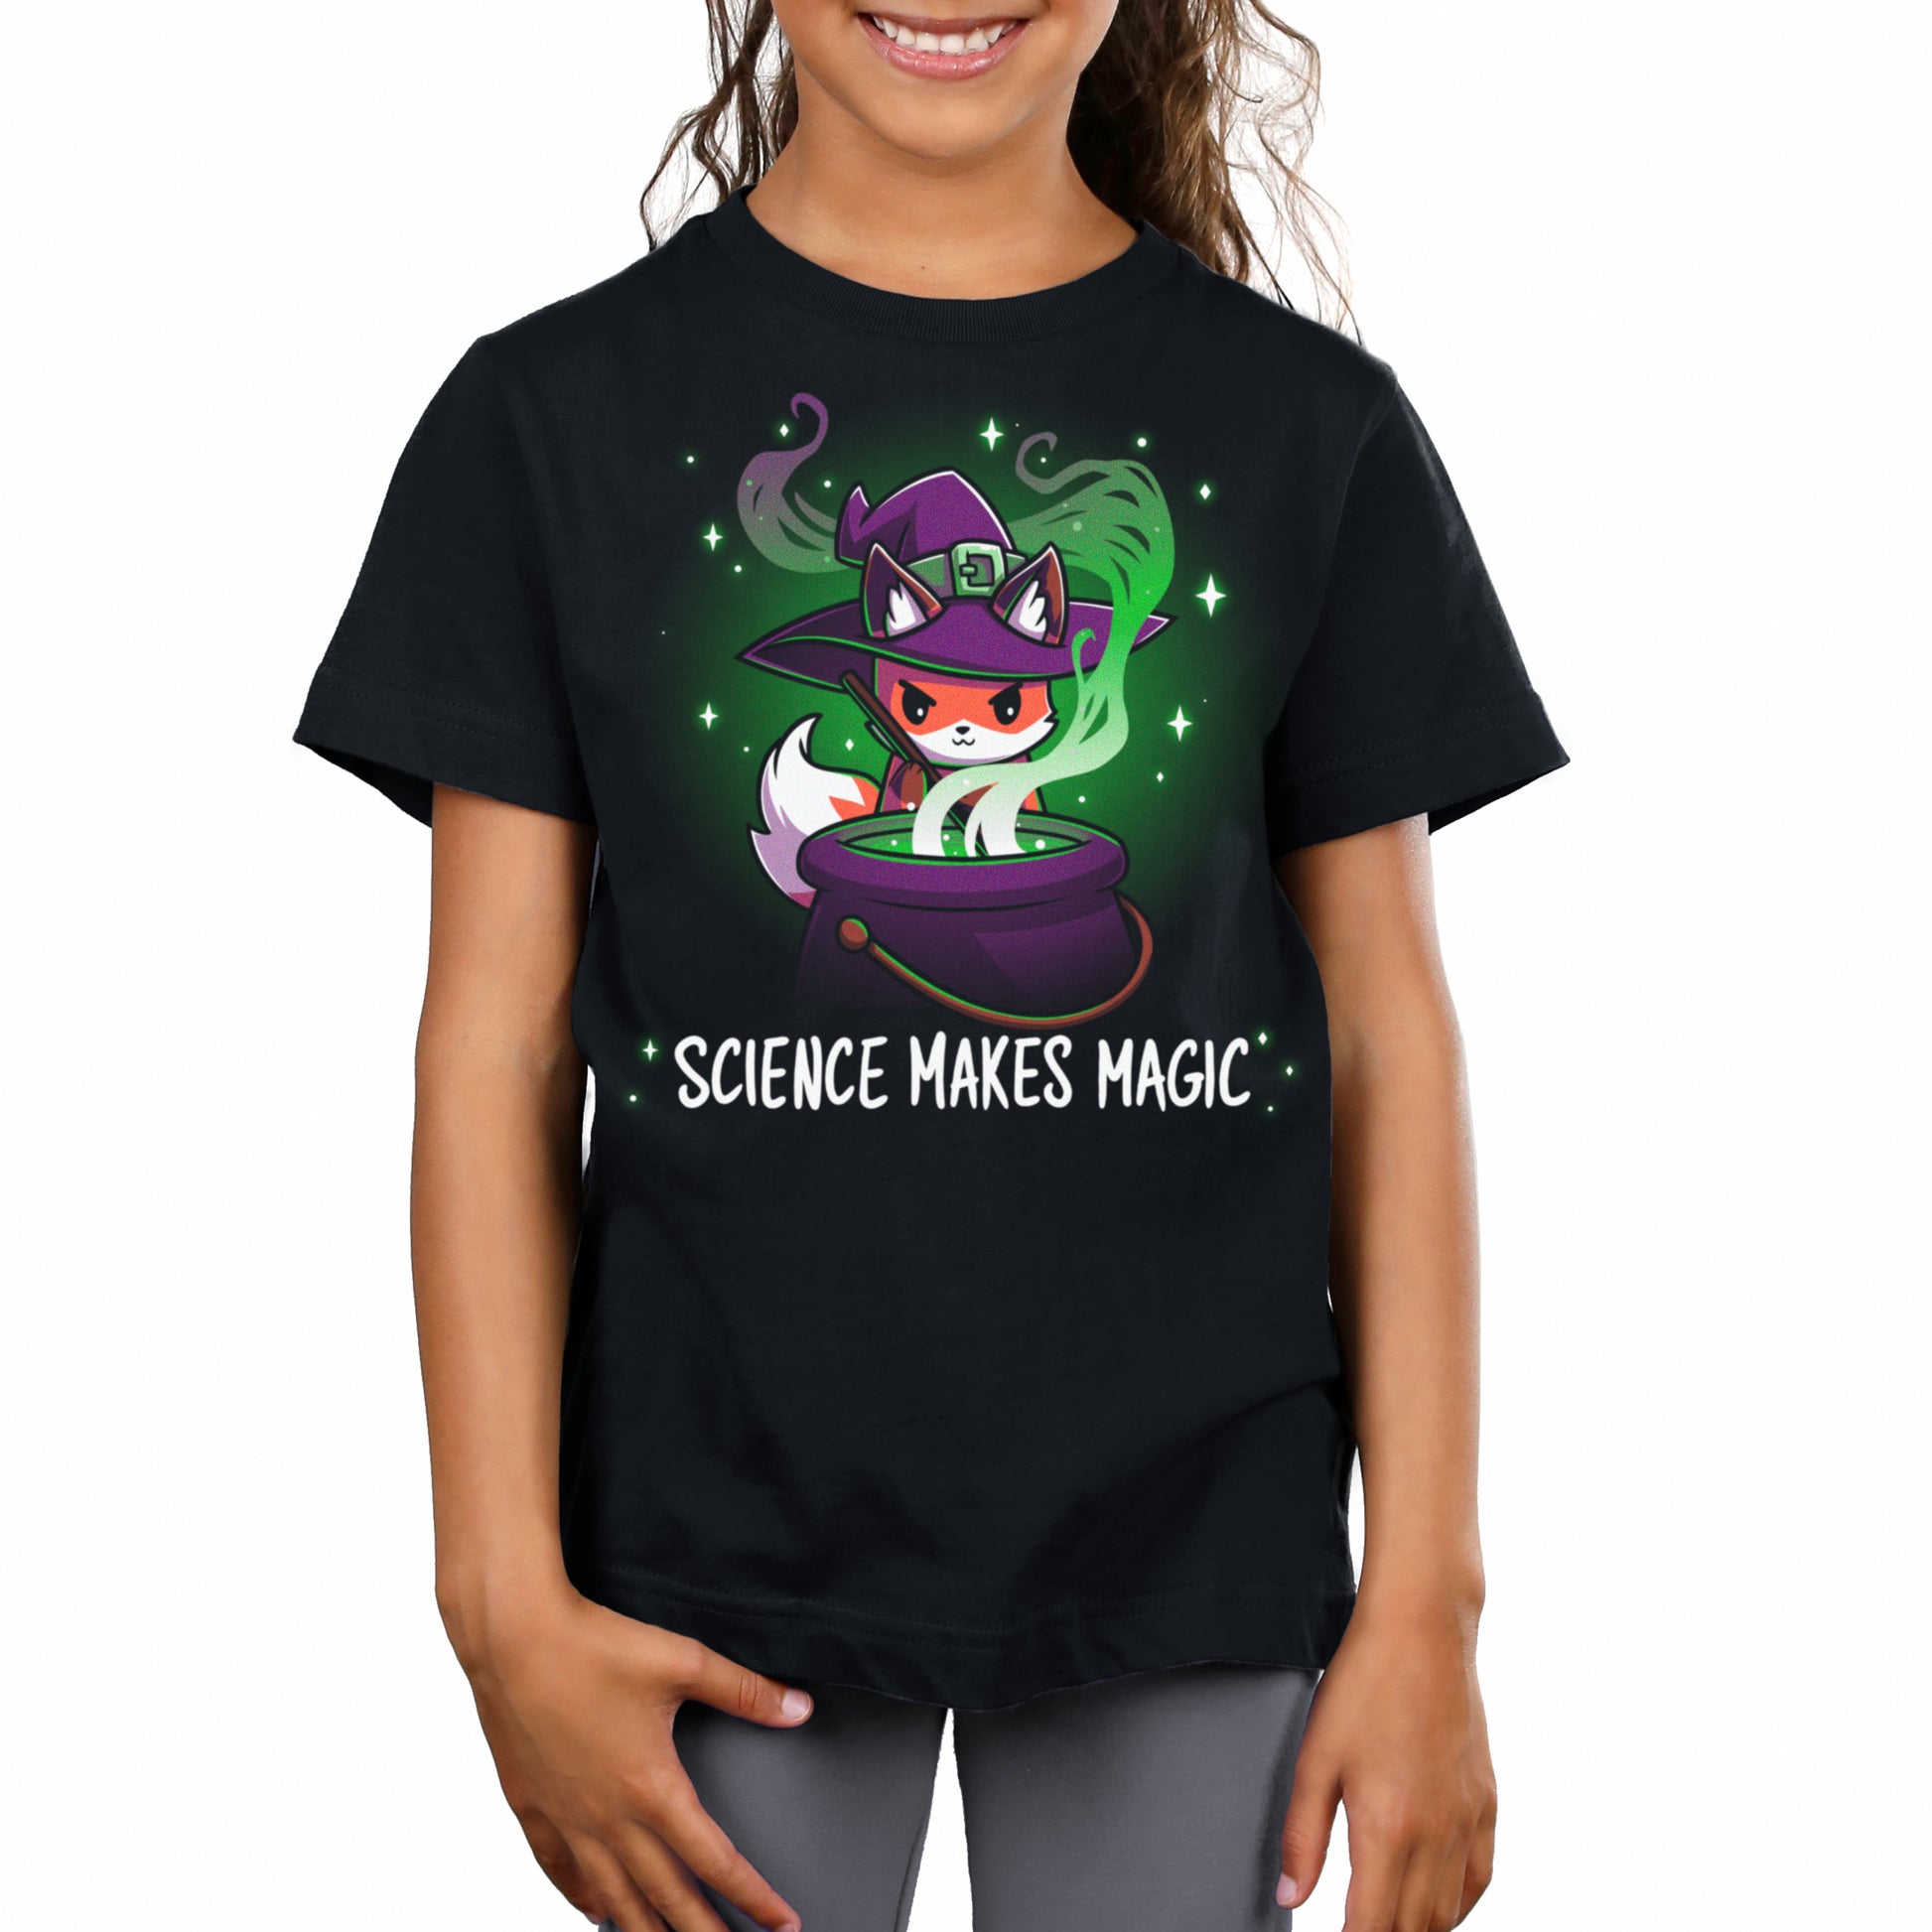 A girl wearing a black t-shirt showcasing the powerful combination of Science Makes Magic by TeeTurtle.